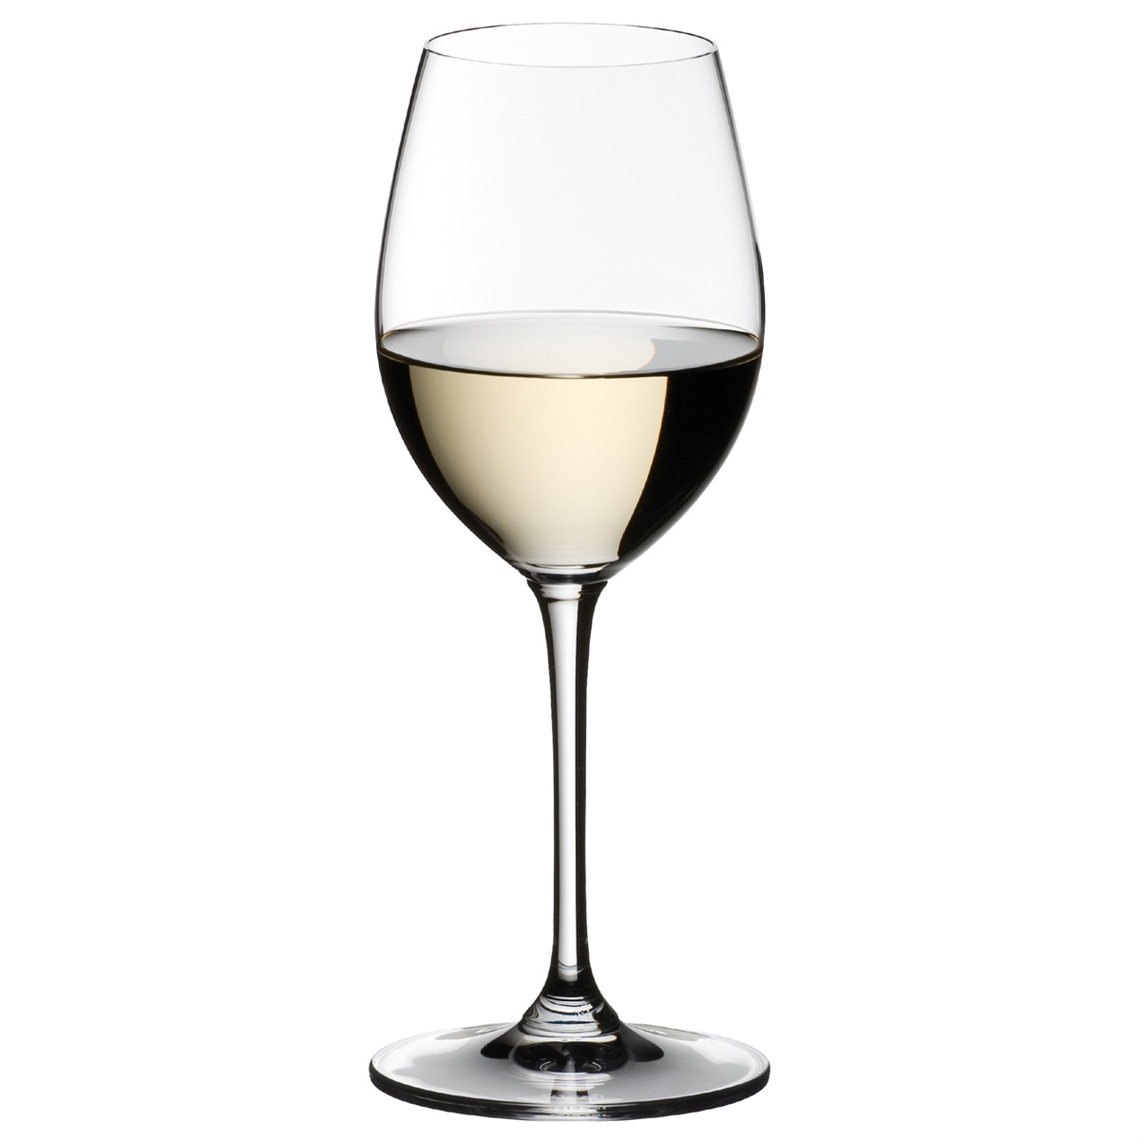 View more schott zwiesel from our Dessert Wine Glasses range